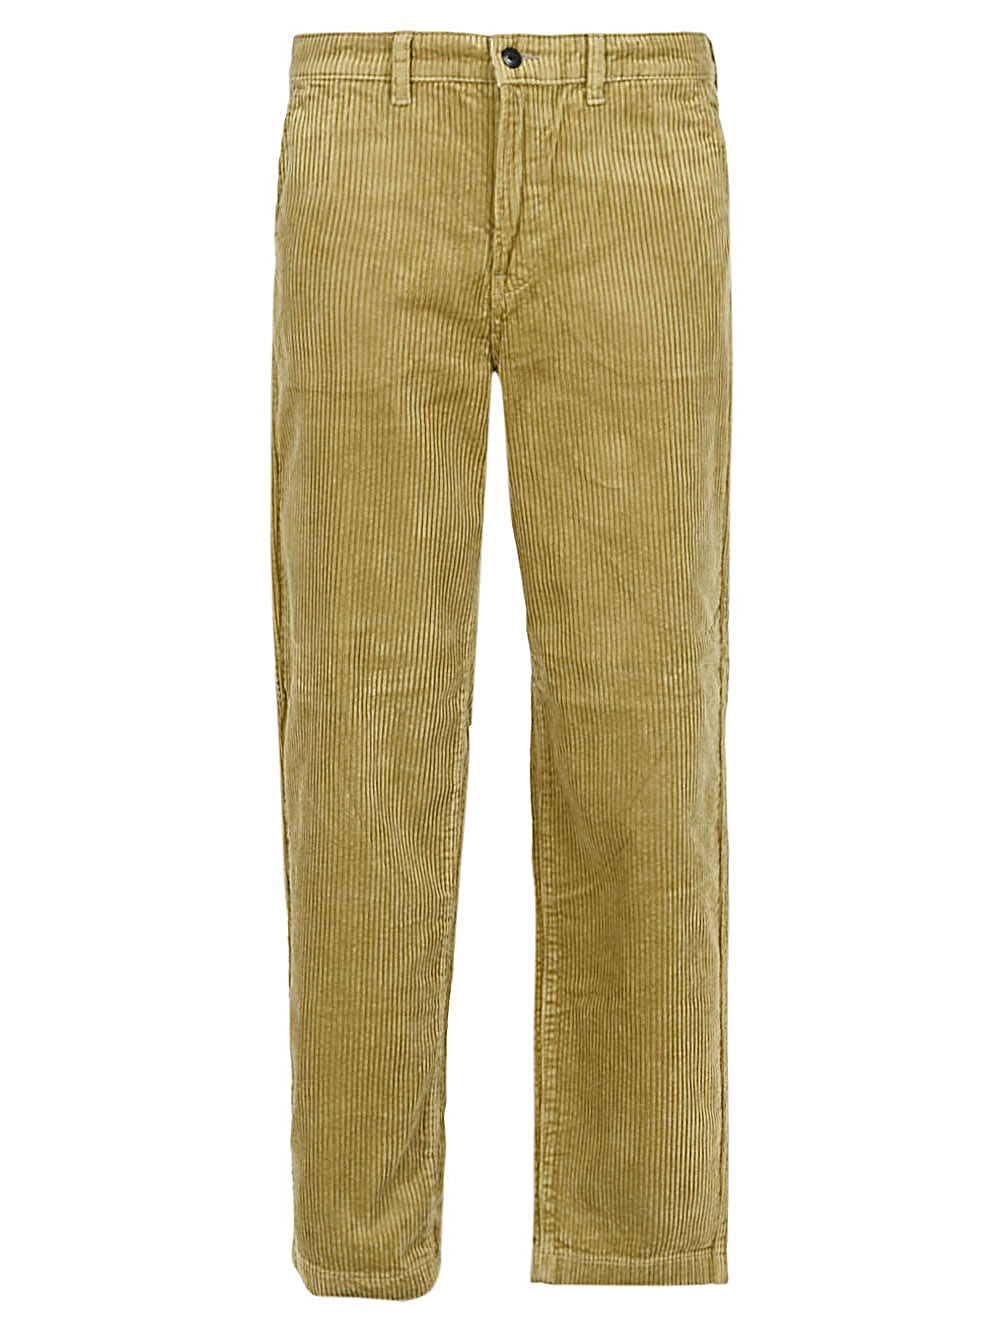 Lee Jeans LEE JEANS- Chino Trousers